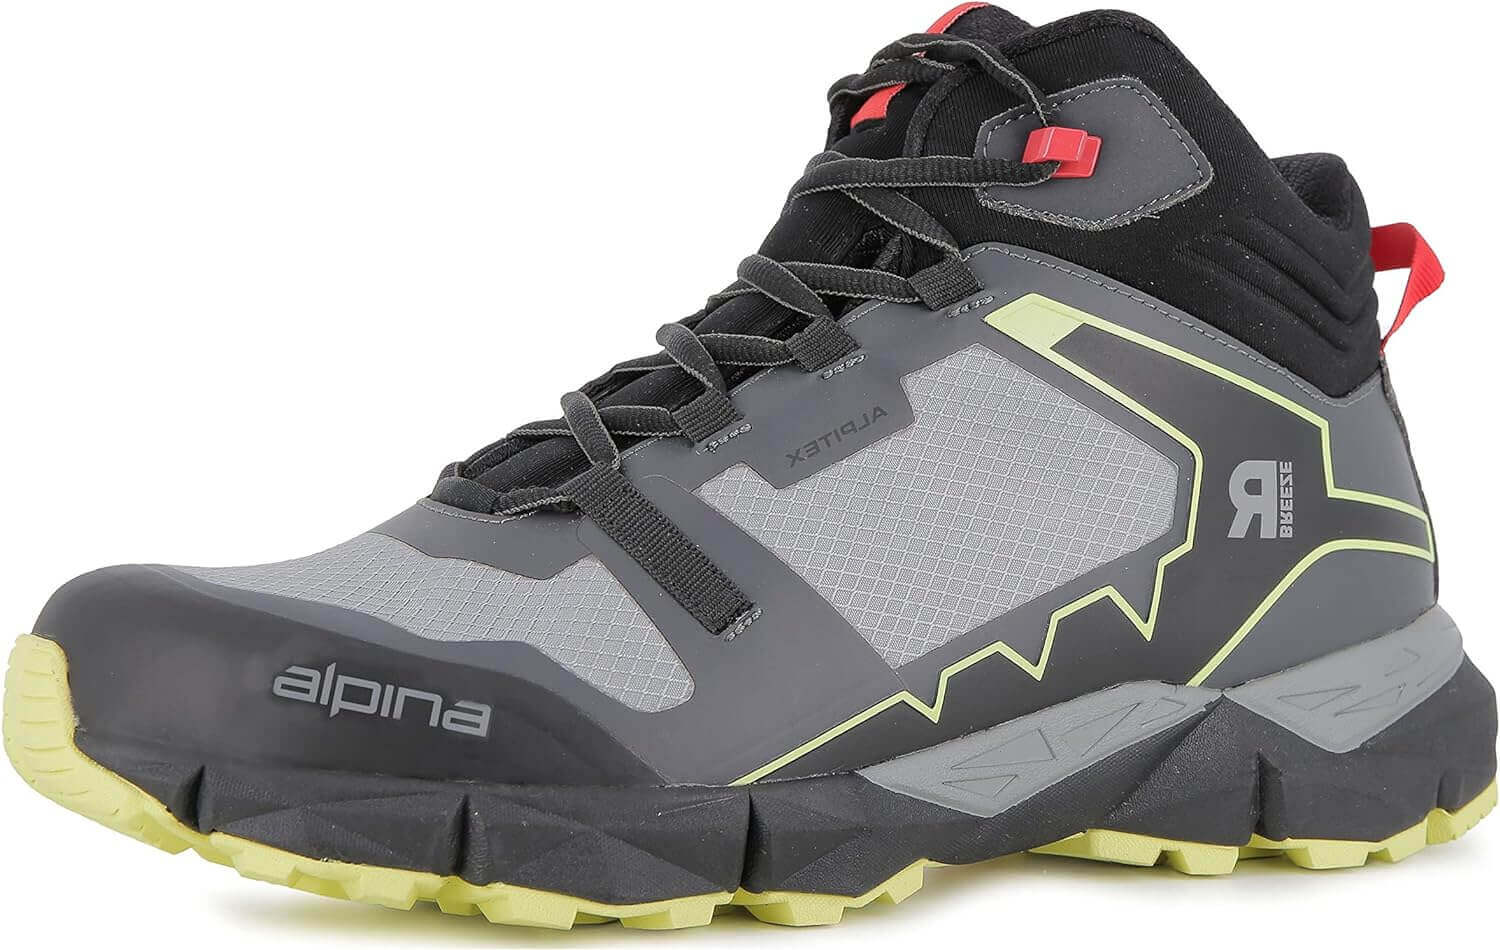 Shop The Latest >Alpina Men's and Women's Waterproof Breathable Hiking Shoes > *Only $228.15*> From The Top Brand > *Alpinal* > Shop Now and Get Free Shipping On Orders Over $45.00 >*Shop Earth Foot*